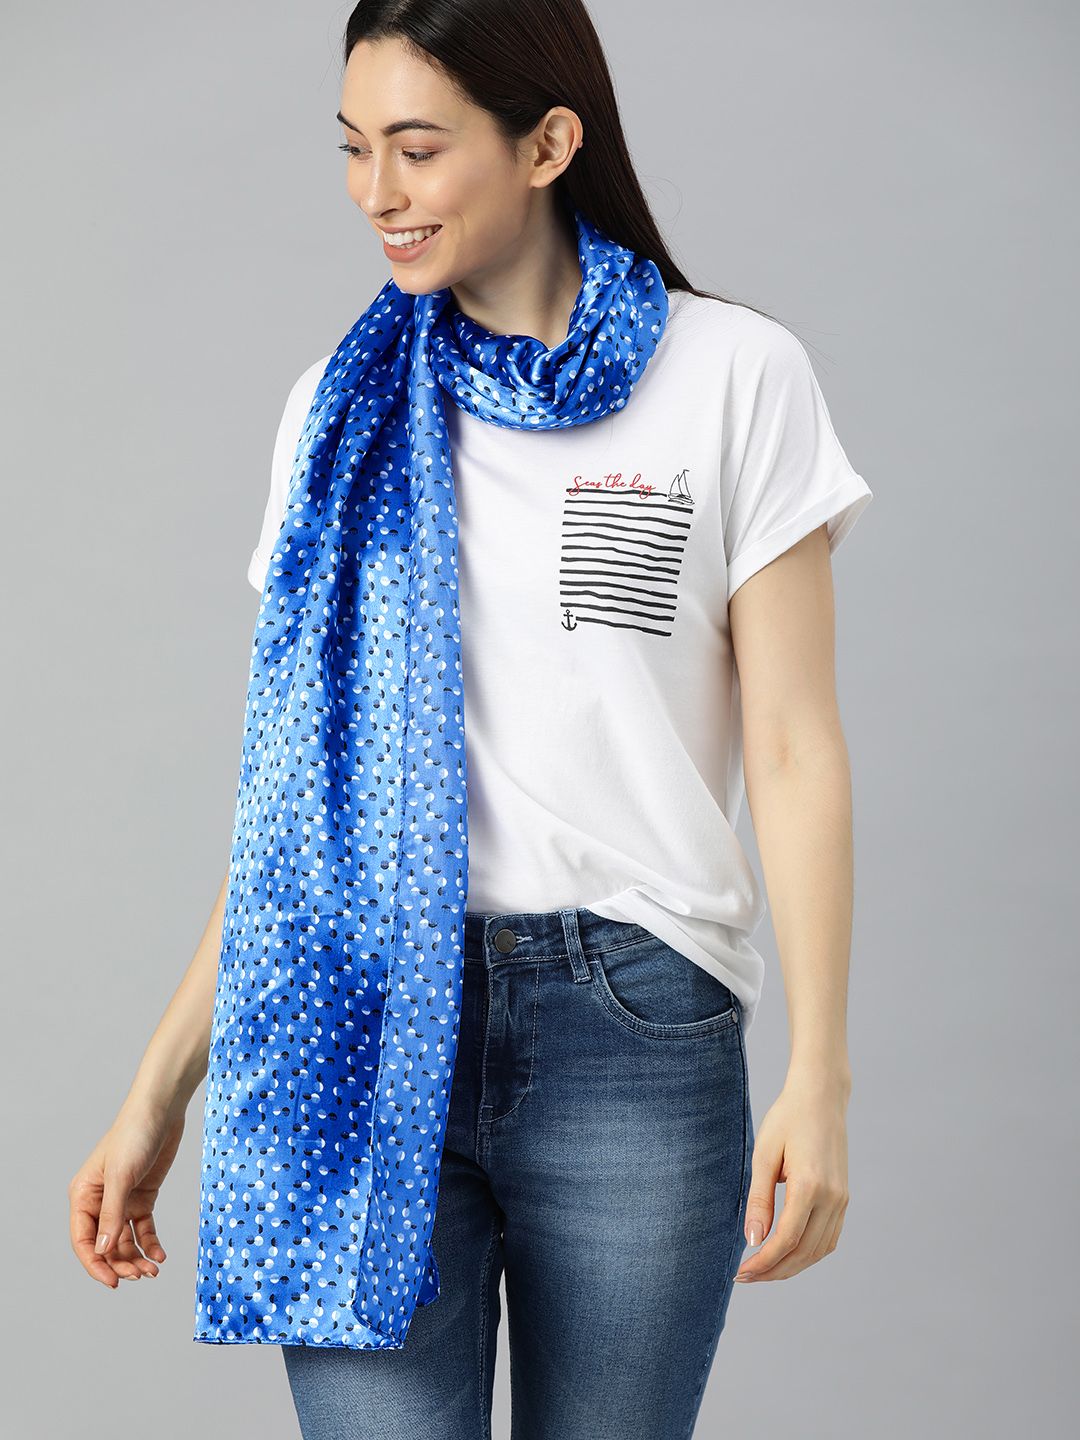 Mast & Harbour Women Blue Printed Scarf Price in India